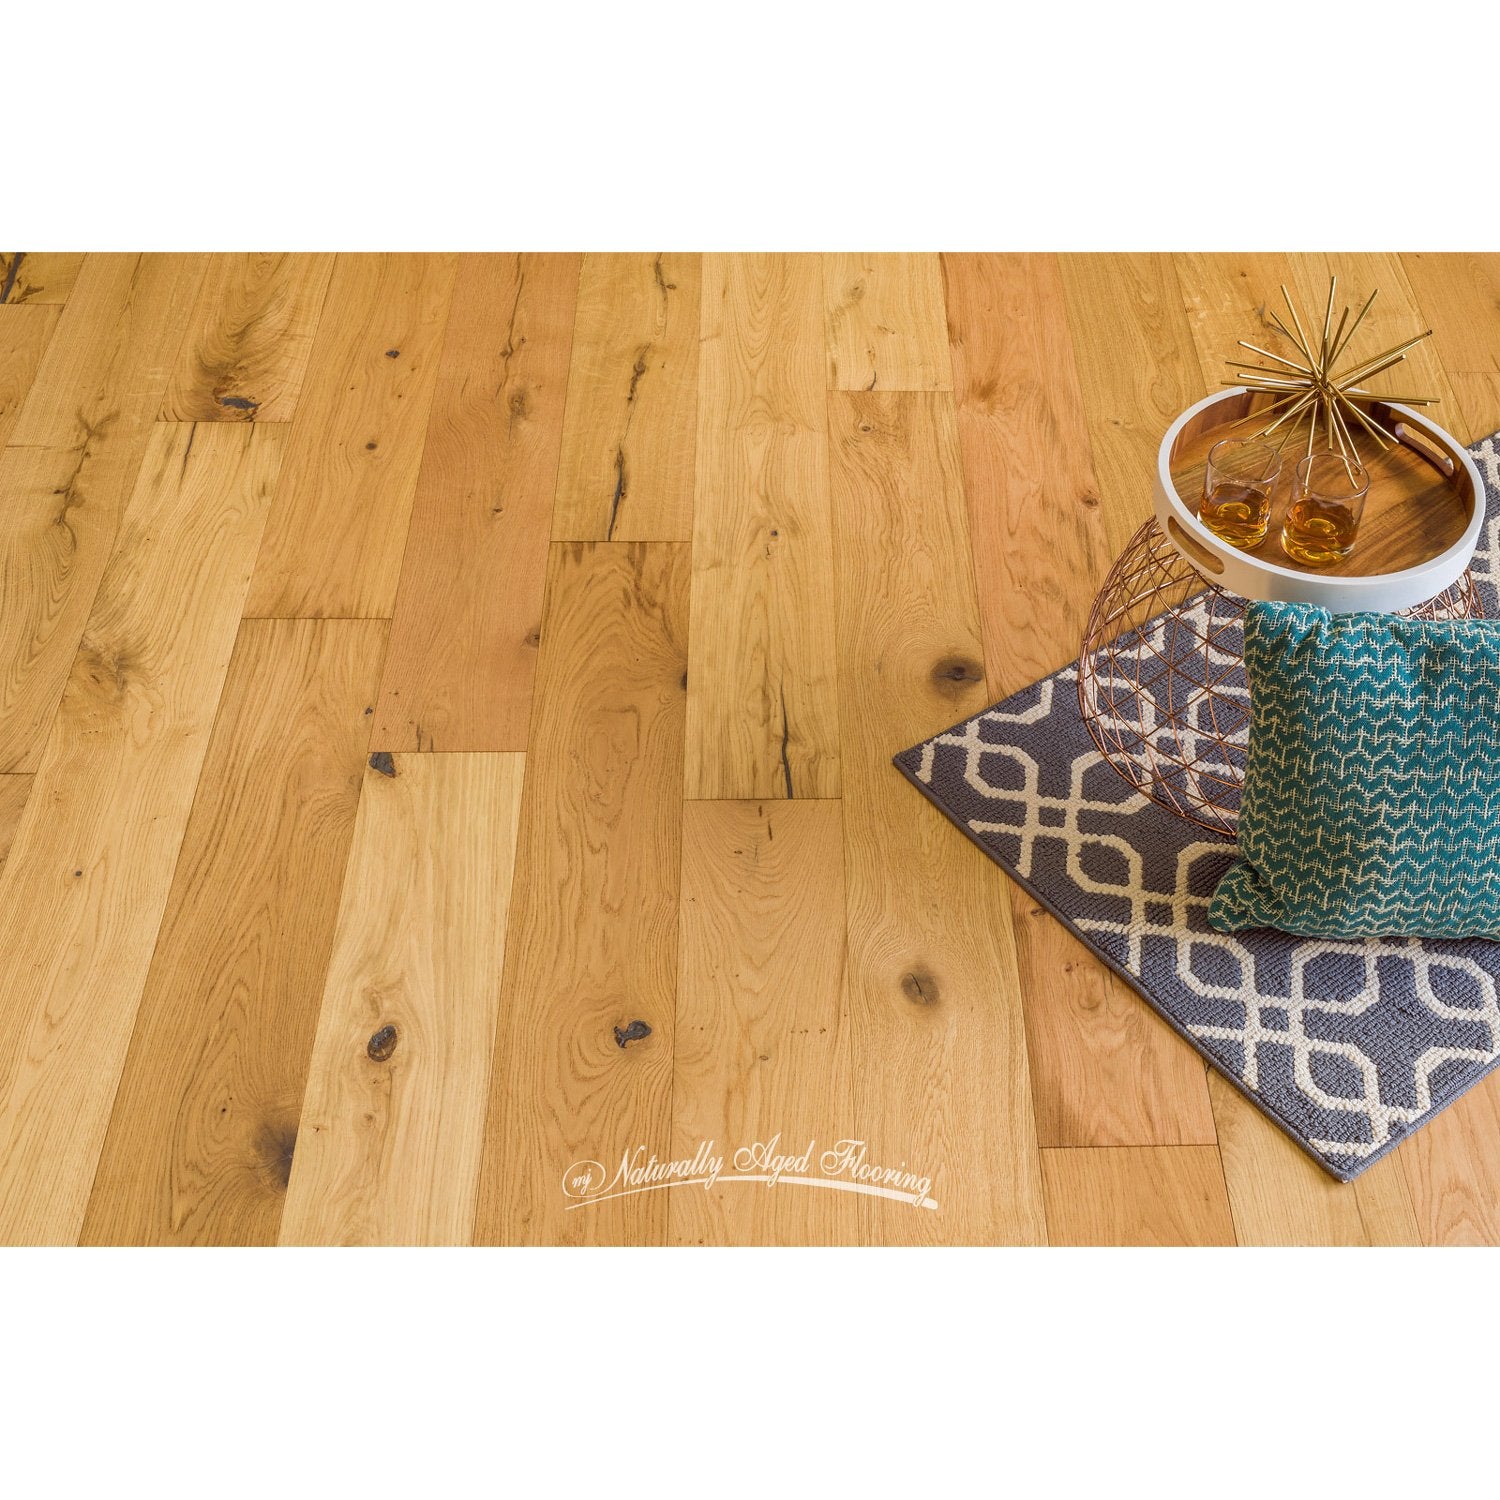 Naturally Aged Flooring - Wire Brushed Series, Oak Engineered Hardwood - Willow Wind